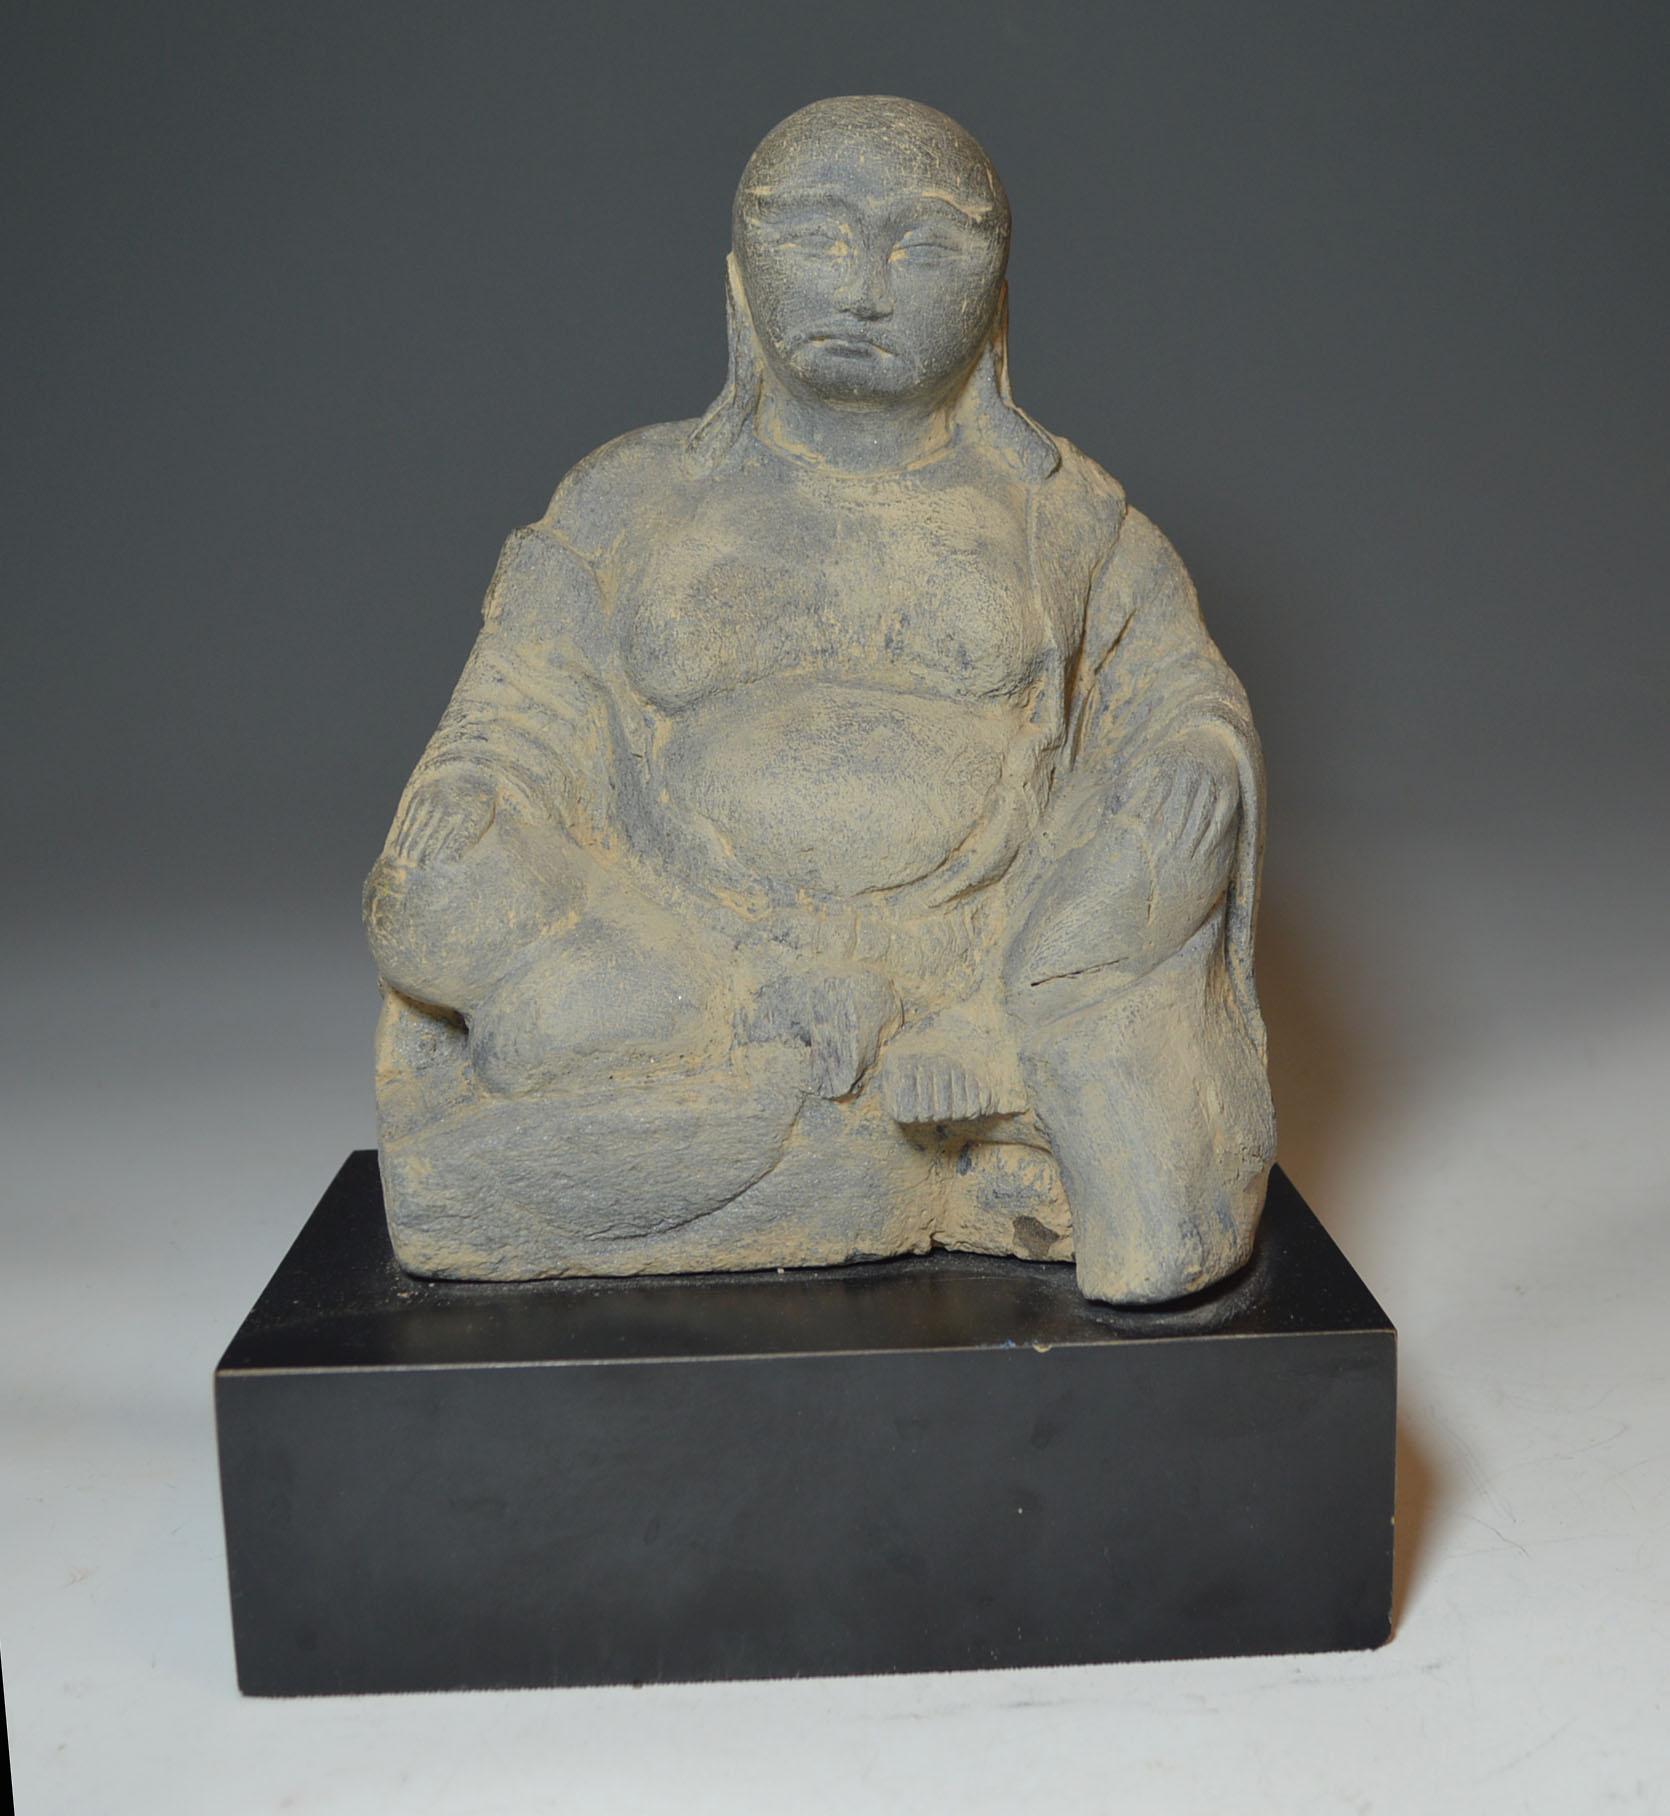 A antique Chinese stone figure of a seated Lohan 

A portly figure of a lohan with mustache and long ear lobes seated in a relaxed posture with open 
robe.

China, Ming dynasty, 15th-16th century or earlier.

Green limestone size 8 1/4 x 6 inches.